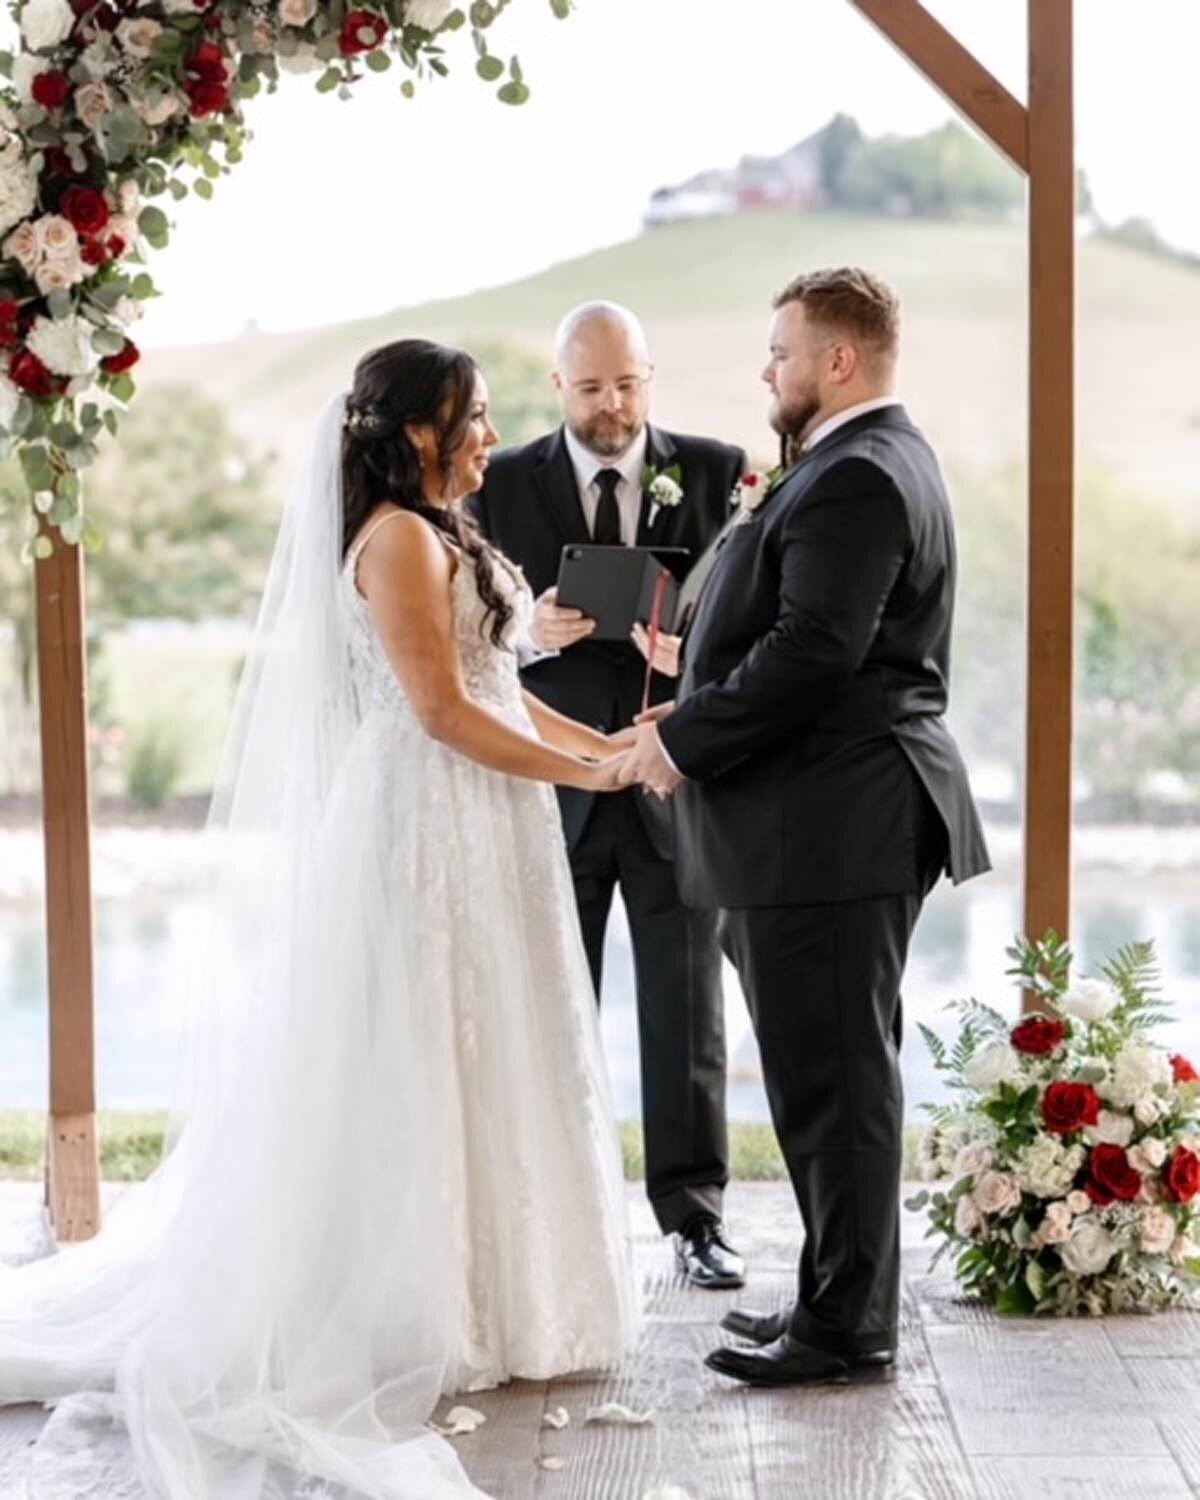 Couple exchanging vows at White Dove Barn